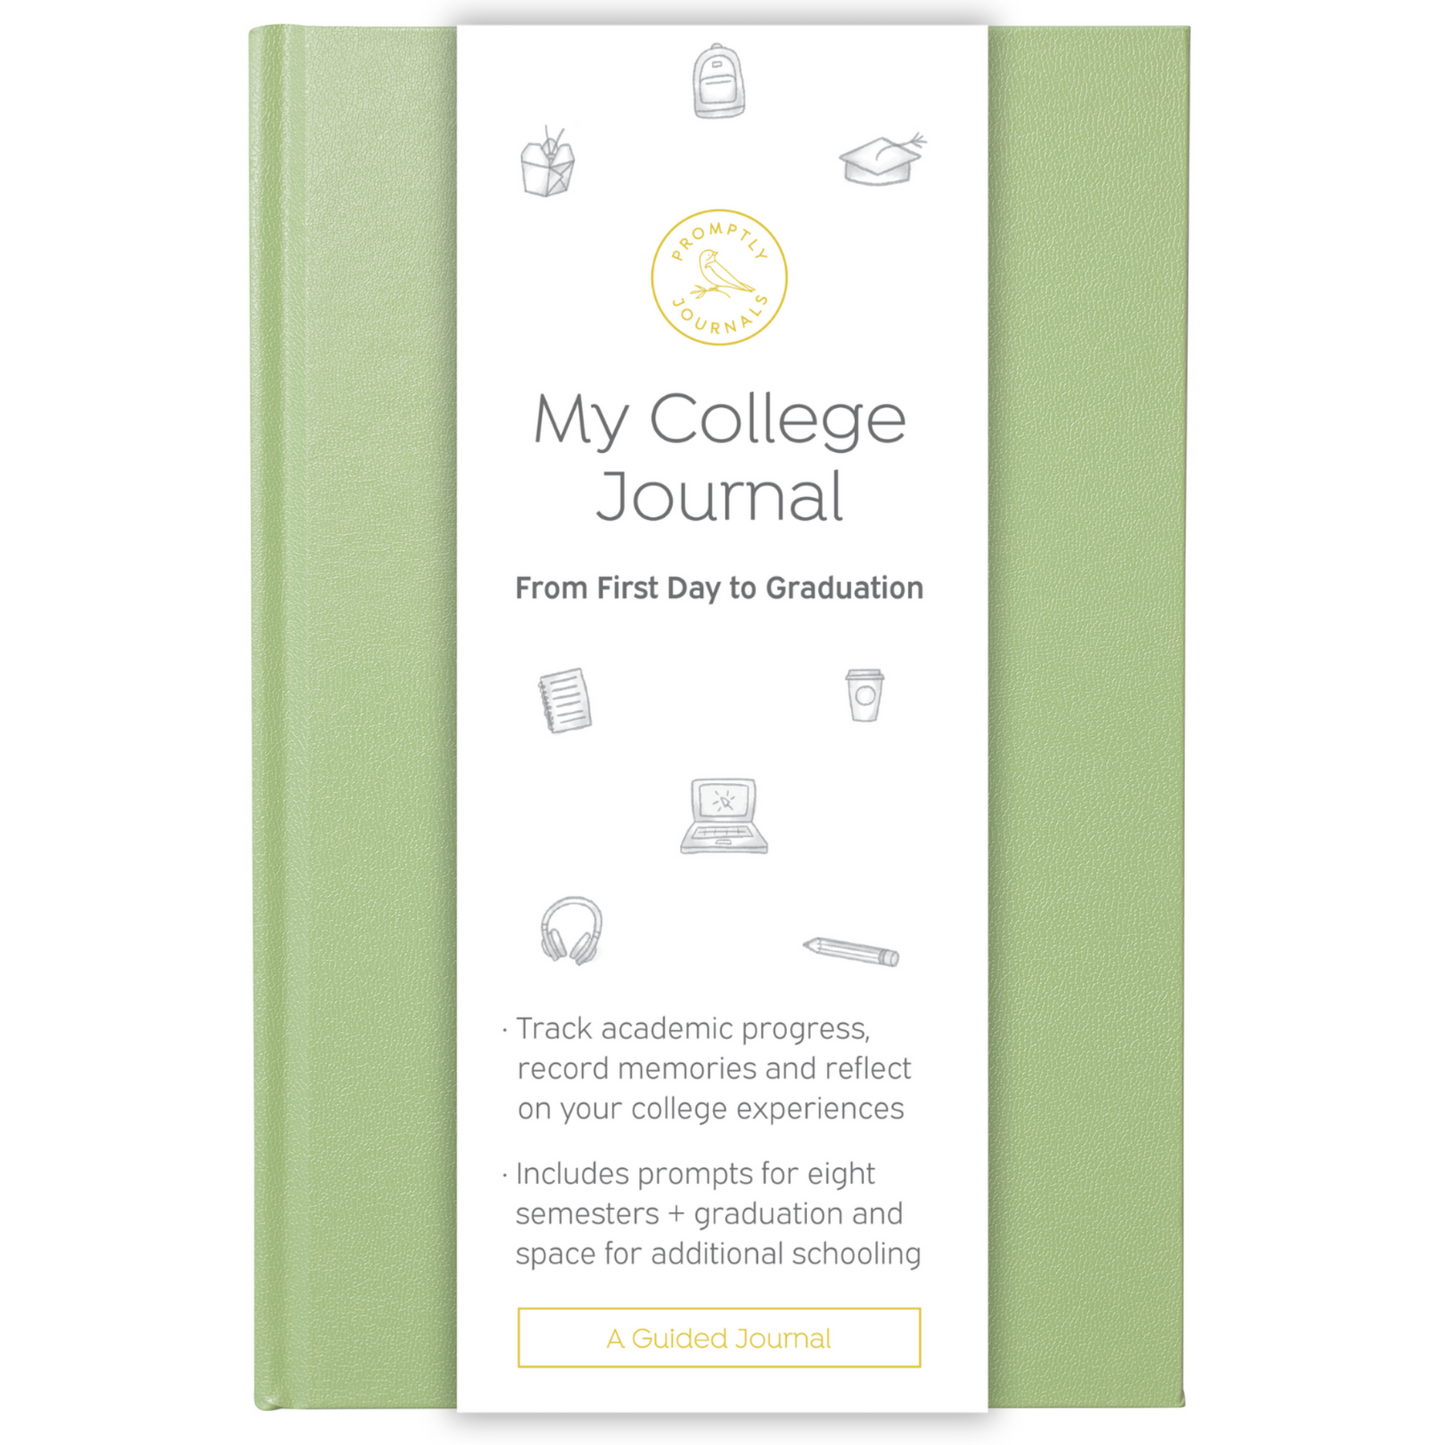 My College Journal: From First Day to Graduation (Matcha) by Promptly Journals